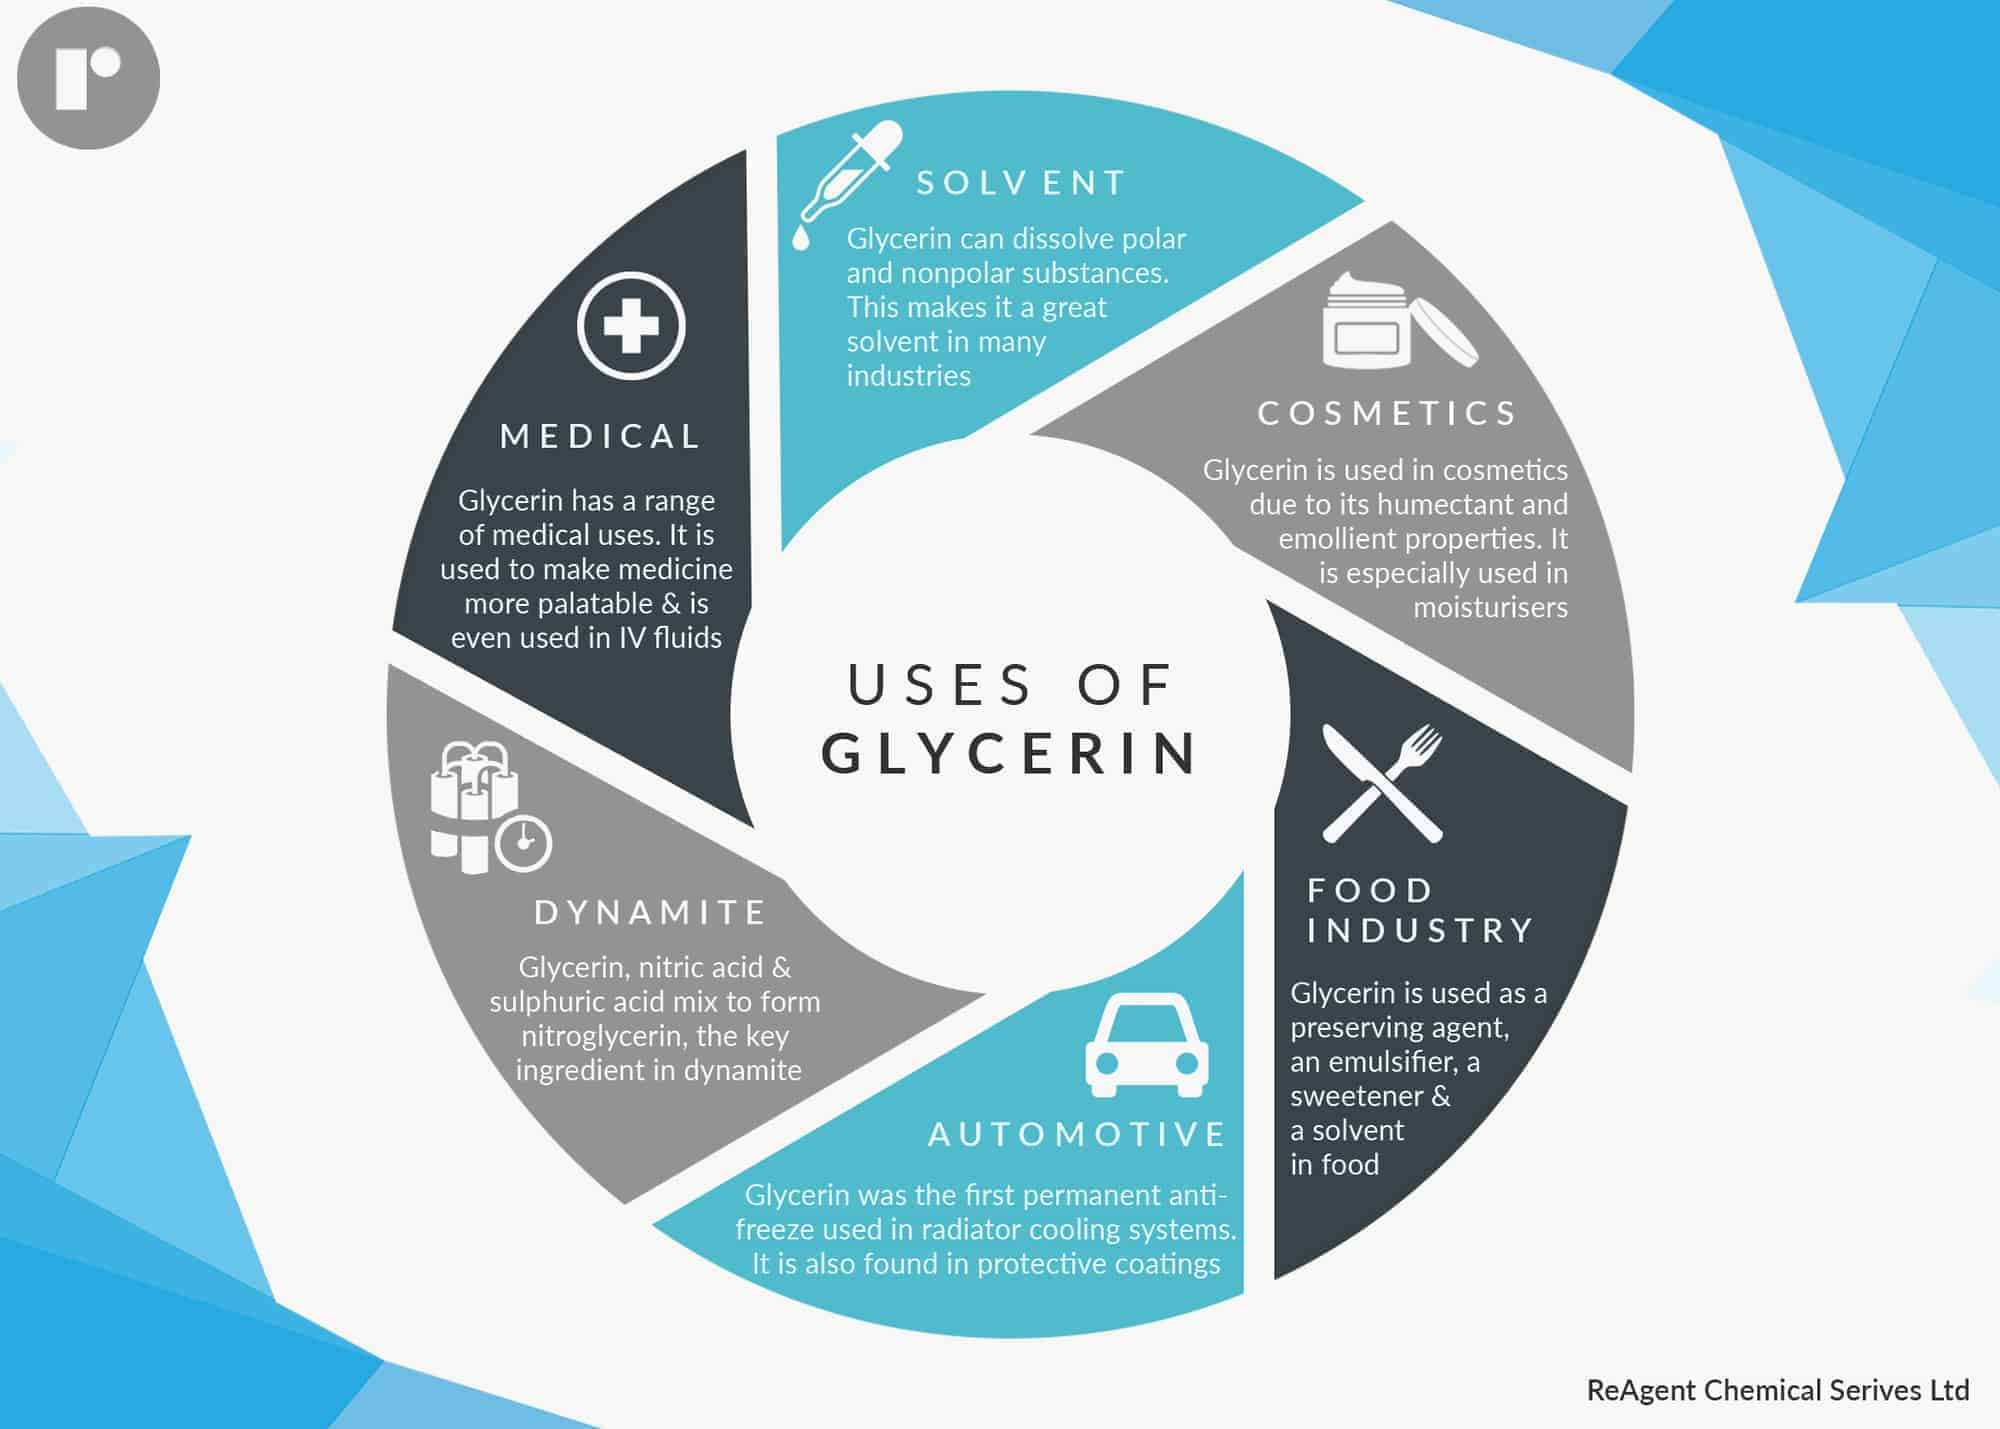 An infographic detailing 6 uses of glycerin